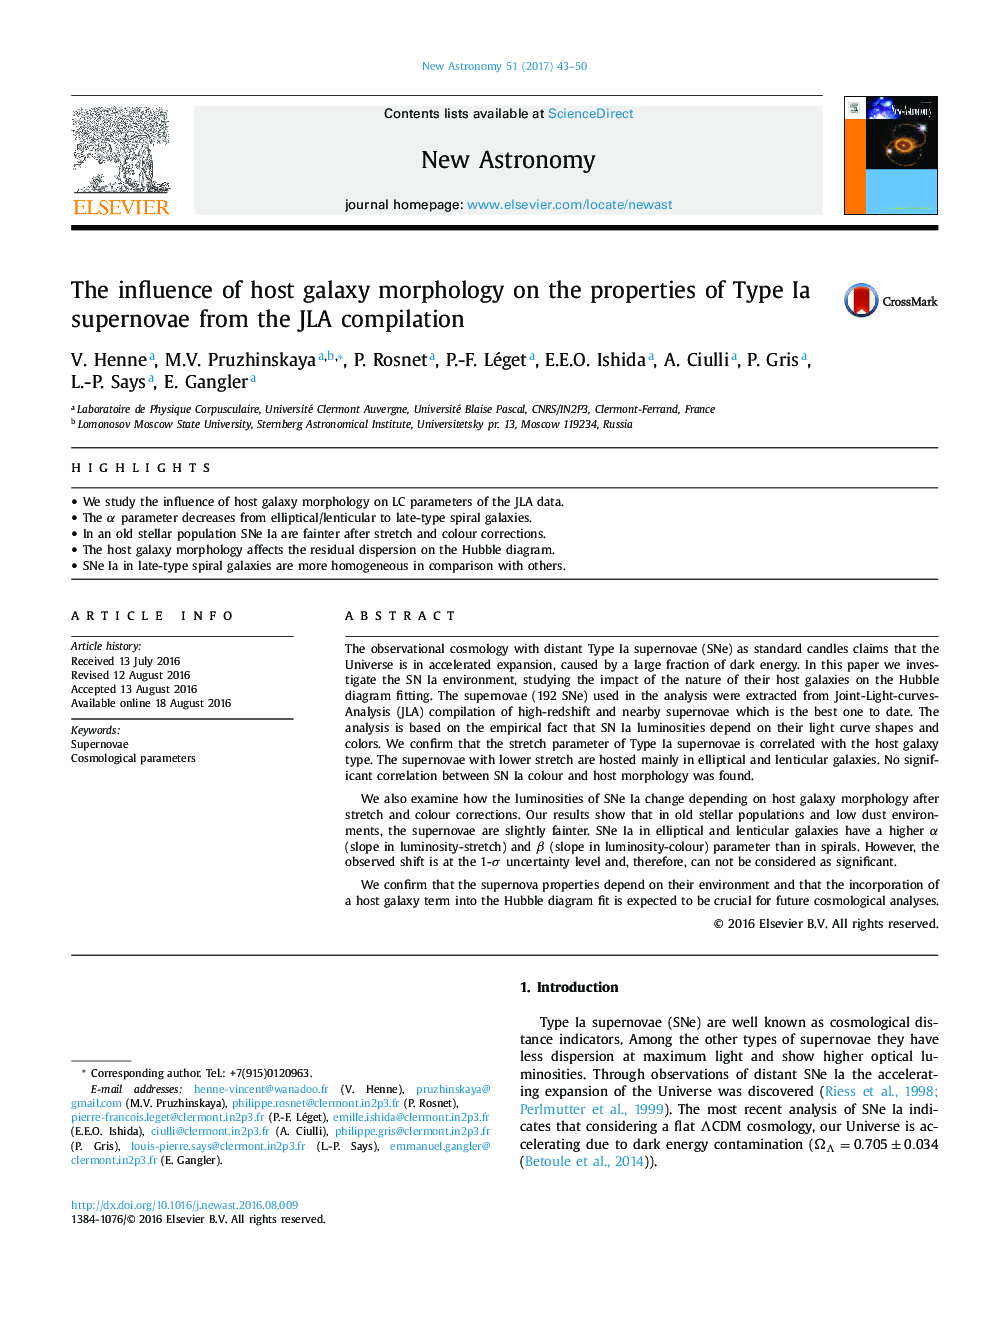 The influence of host galaxy morphology on the properties of Type Ia supernovae from the JLA compilation